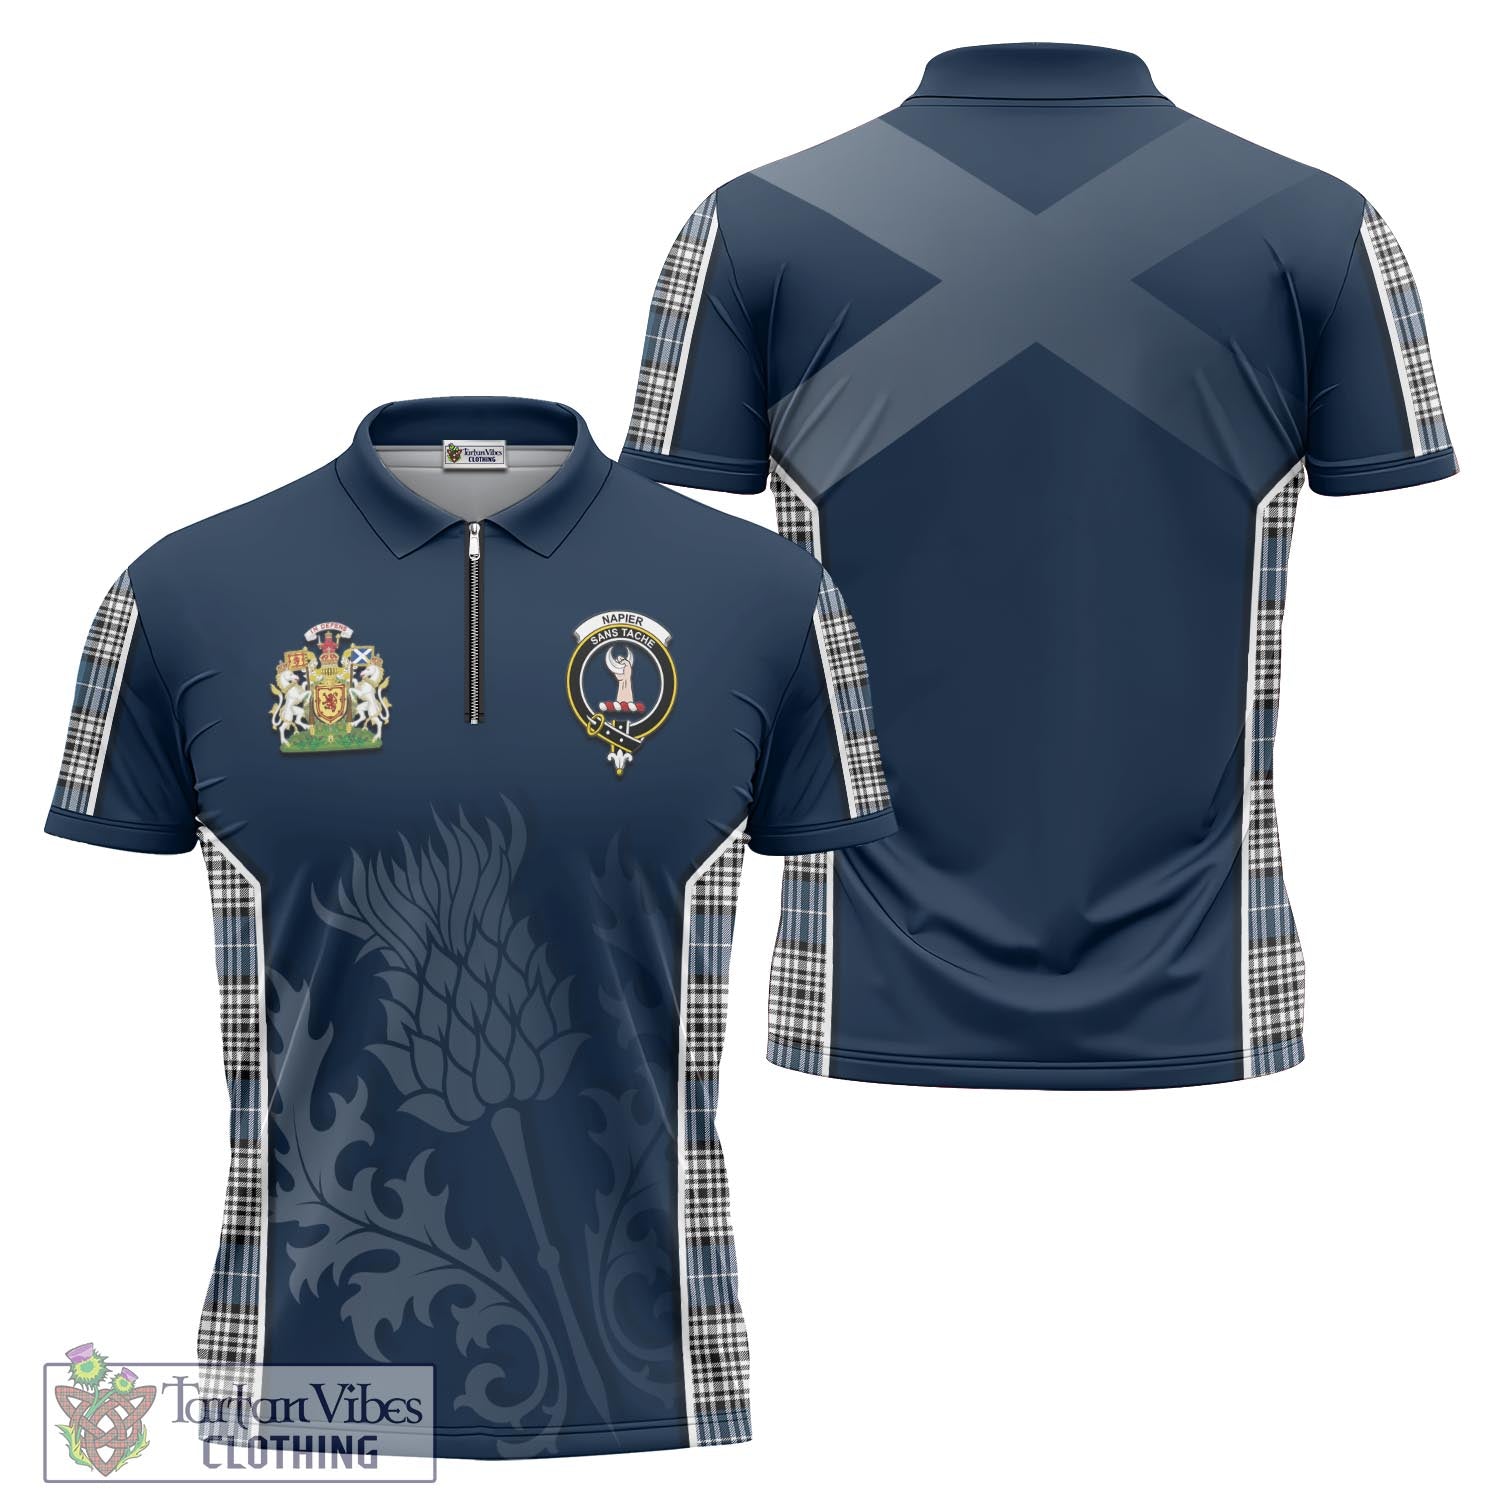 Tartan Vibes Clothing Napier Modern Tartan Zipper Polo Shirt with Family Crest and Scottish Thistle Vibes Sport Style